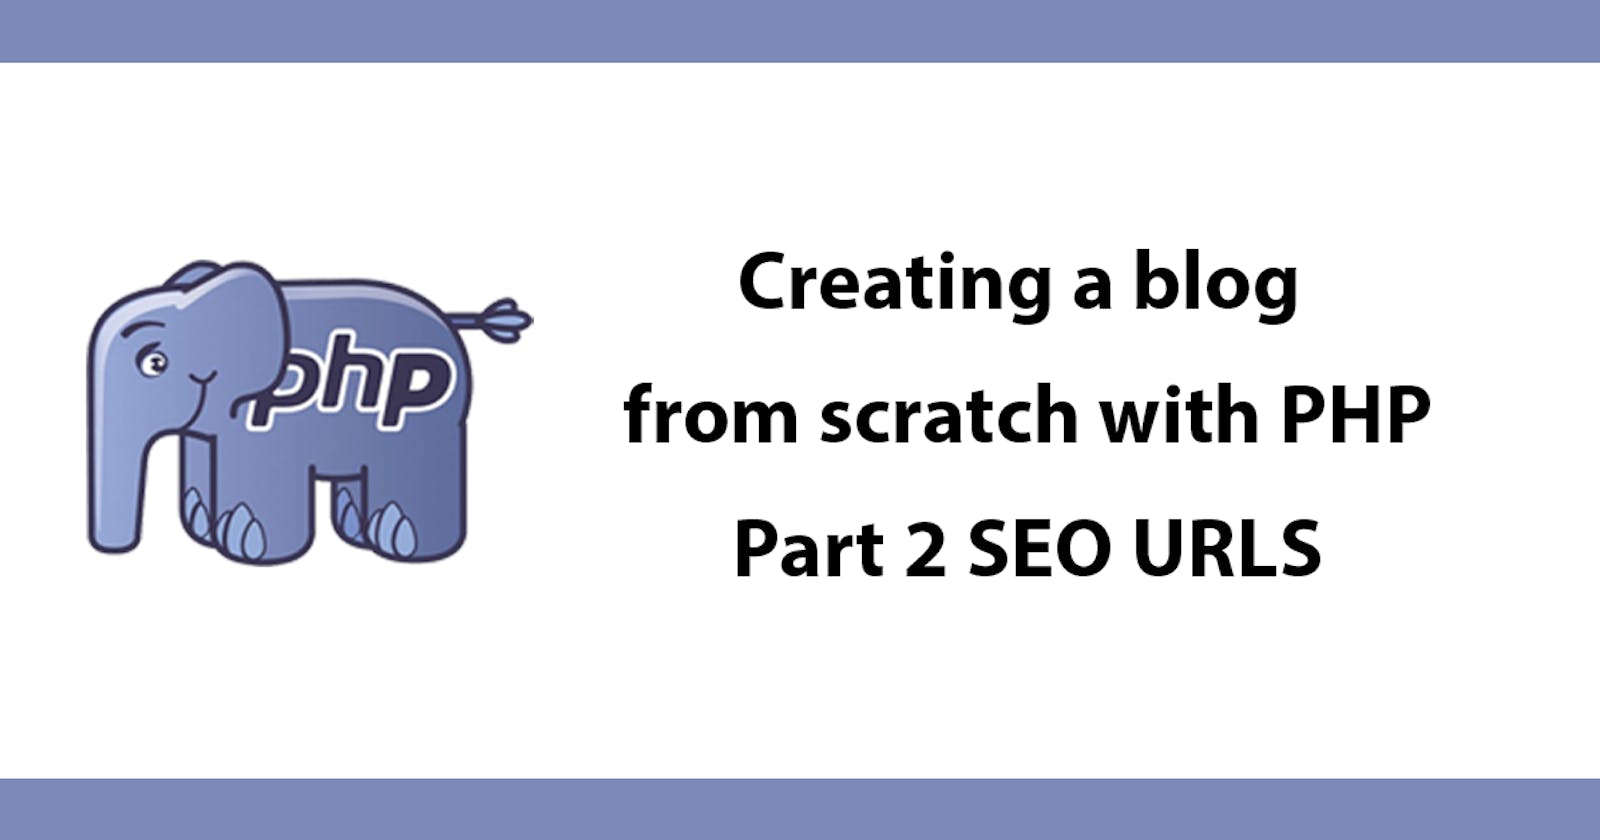 Creating a blog from scratch with PHP - Part 2 SEO URLS